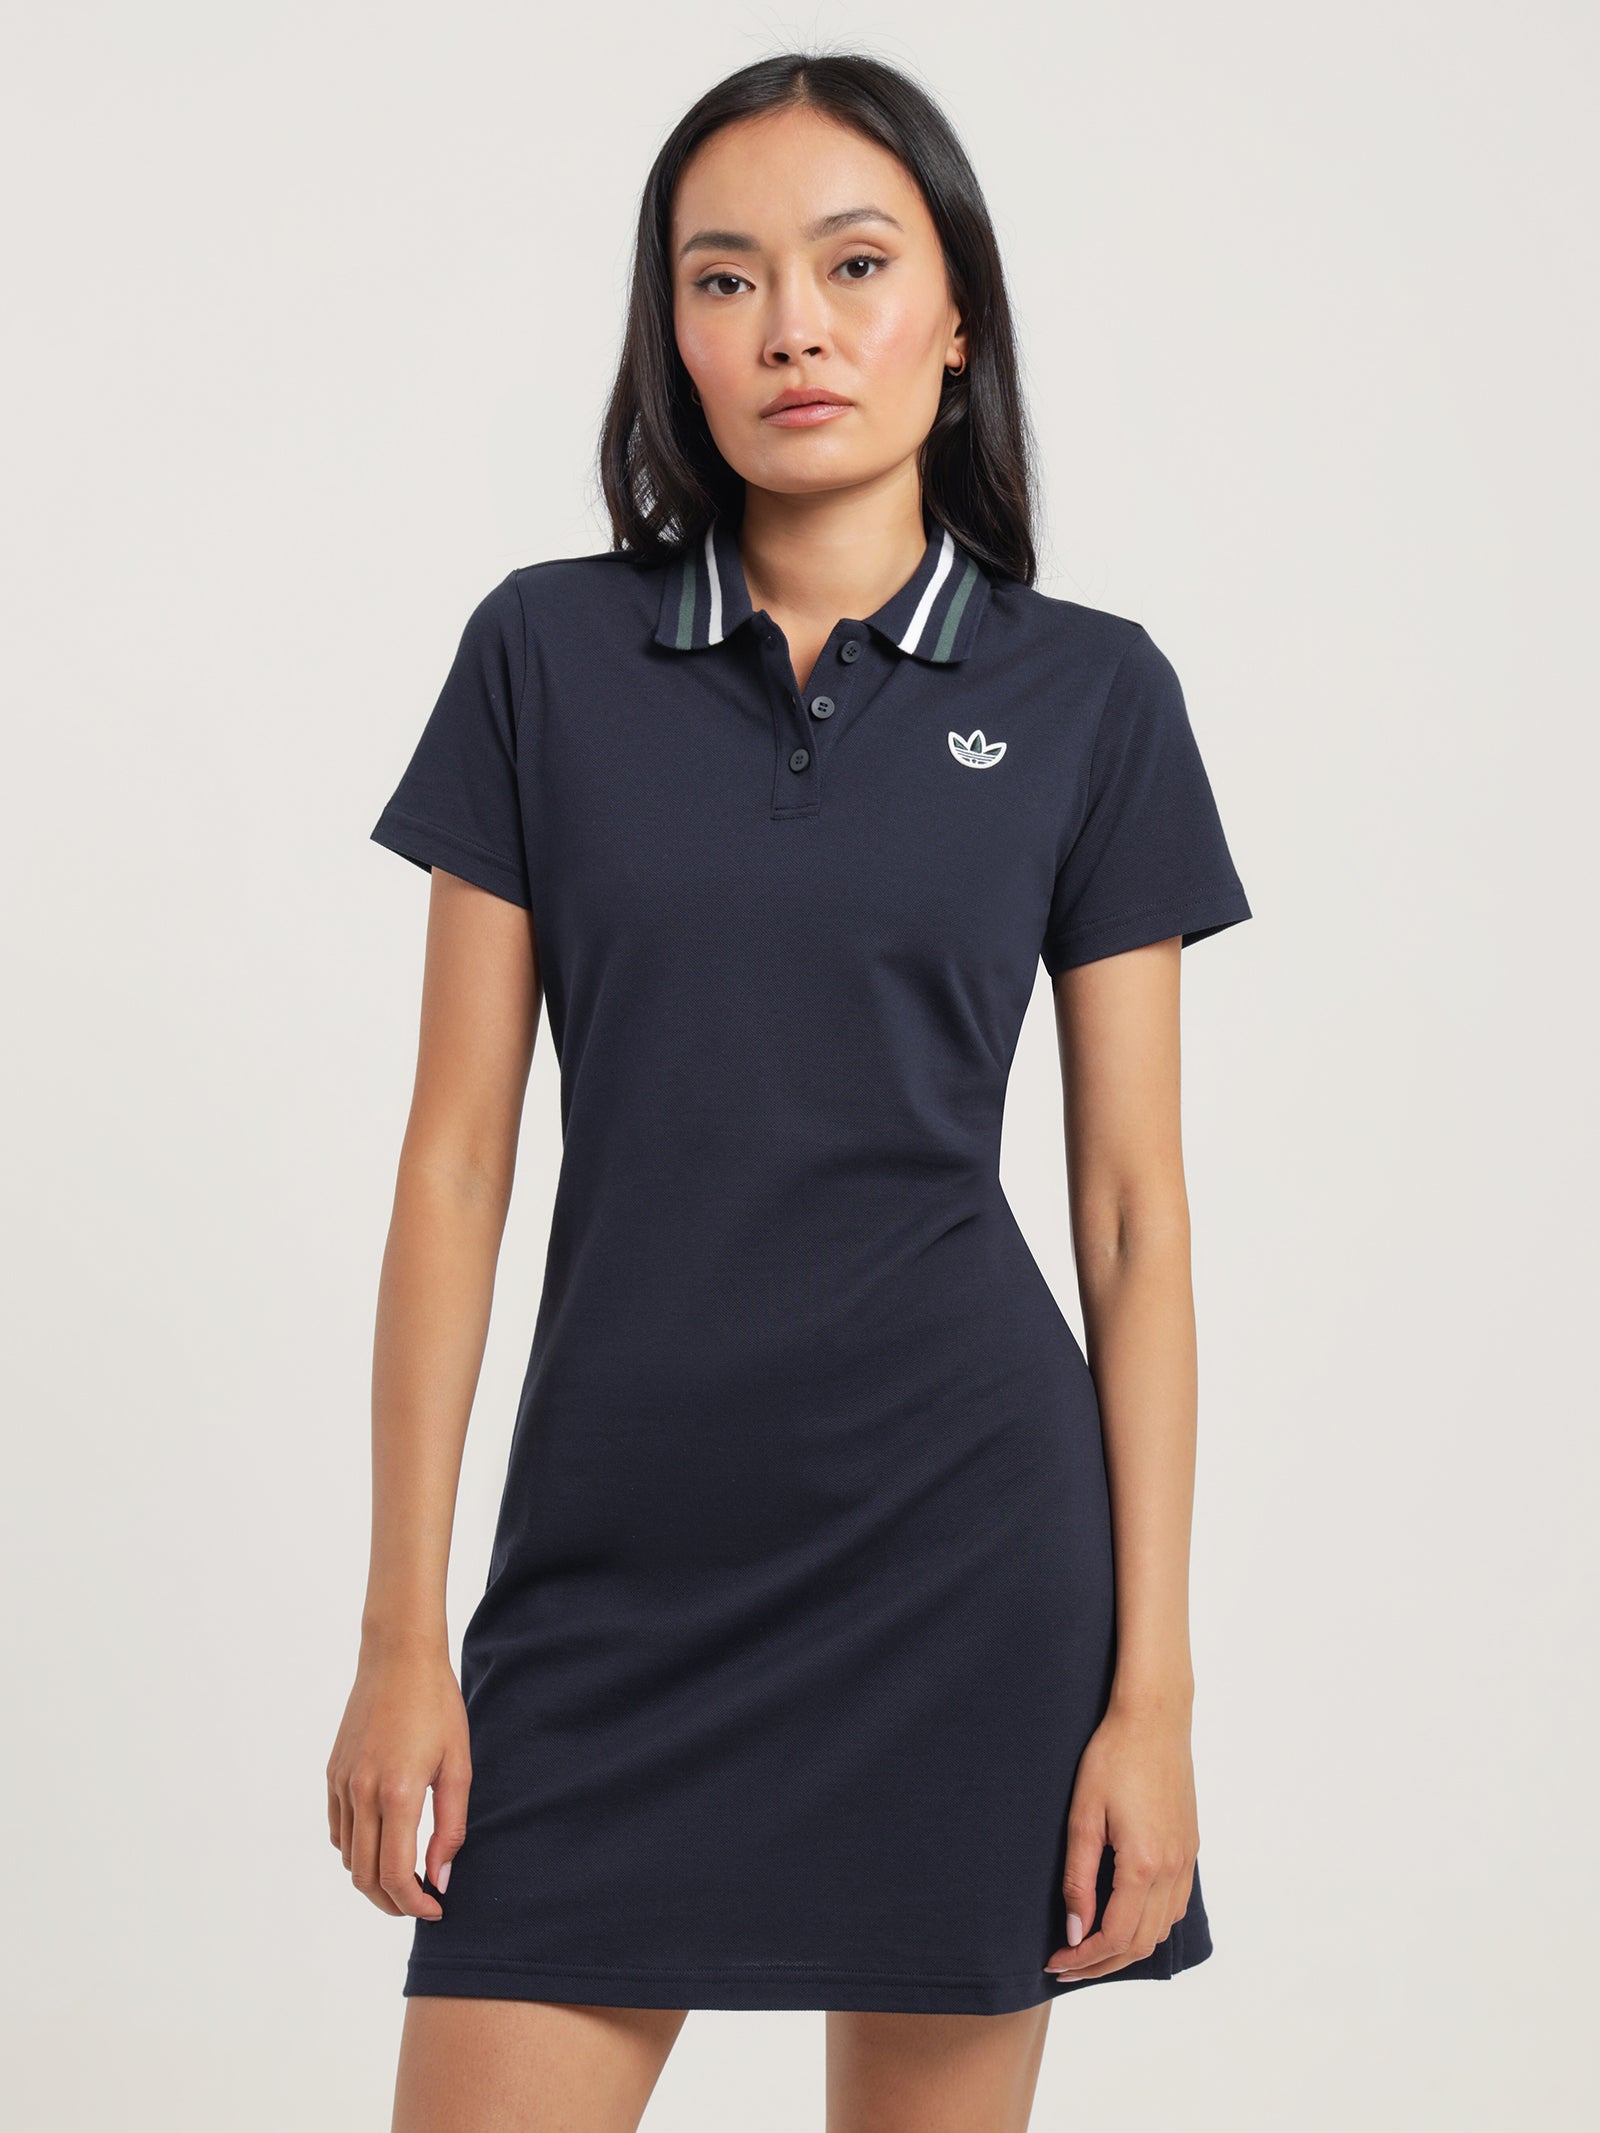 Originals Class of 72 Polo Dress in Ink - Glue Store